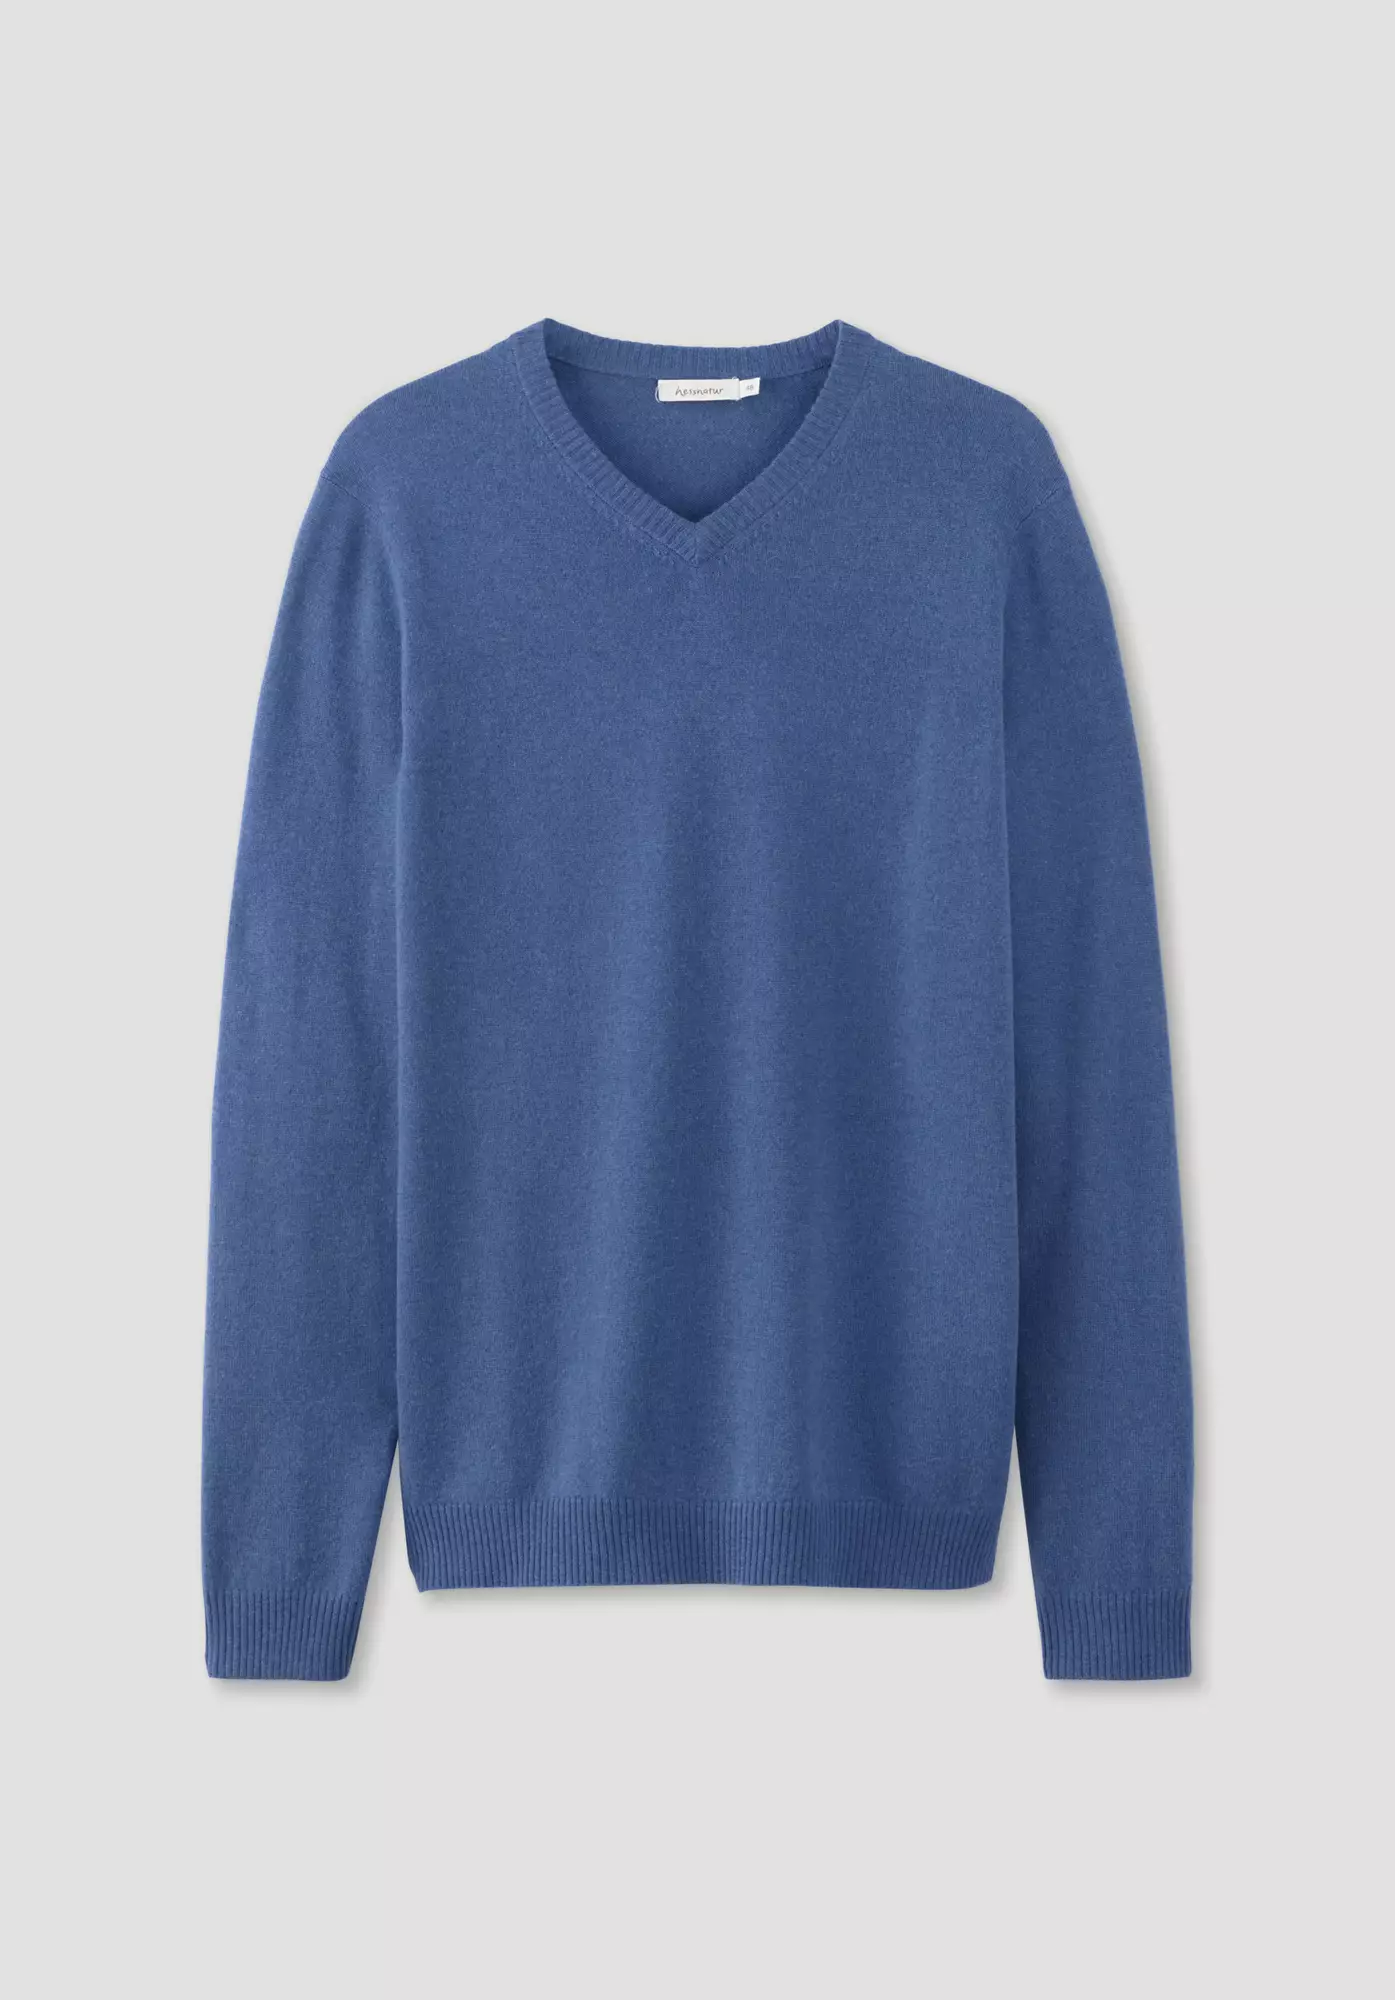 V-neck sweater made of virgin wool with cashmere - 4